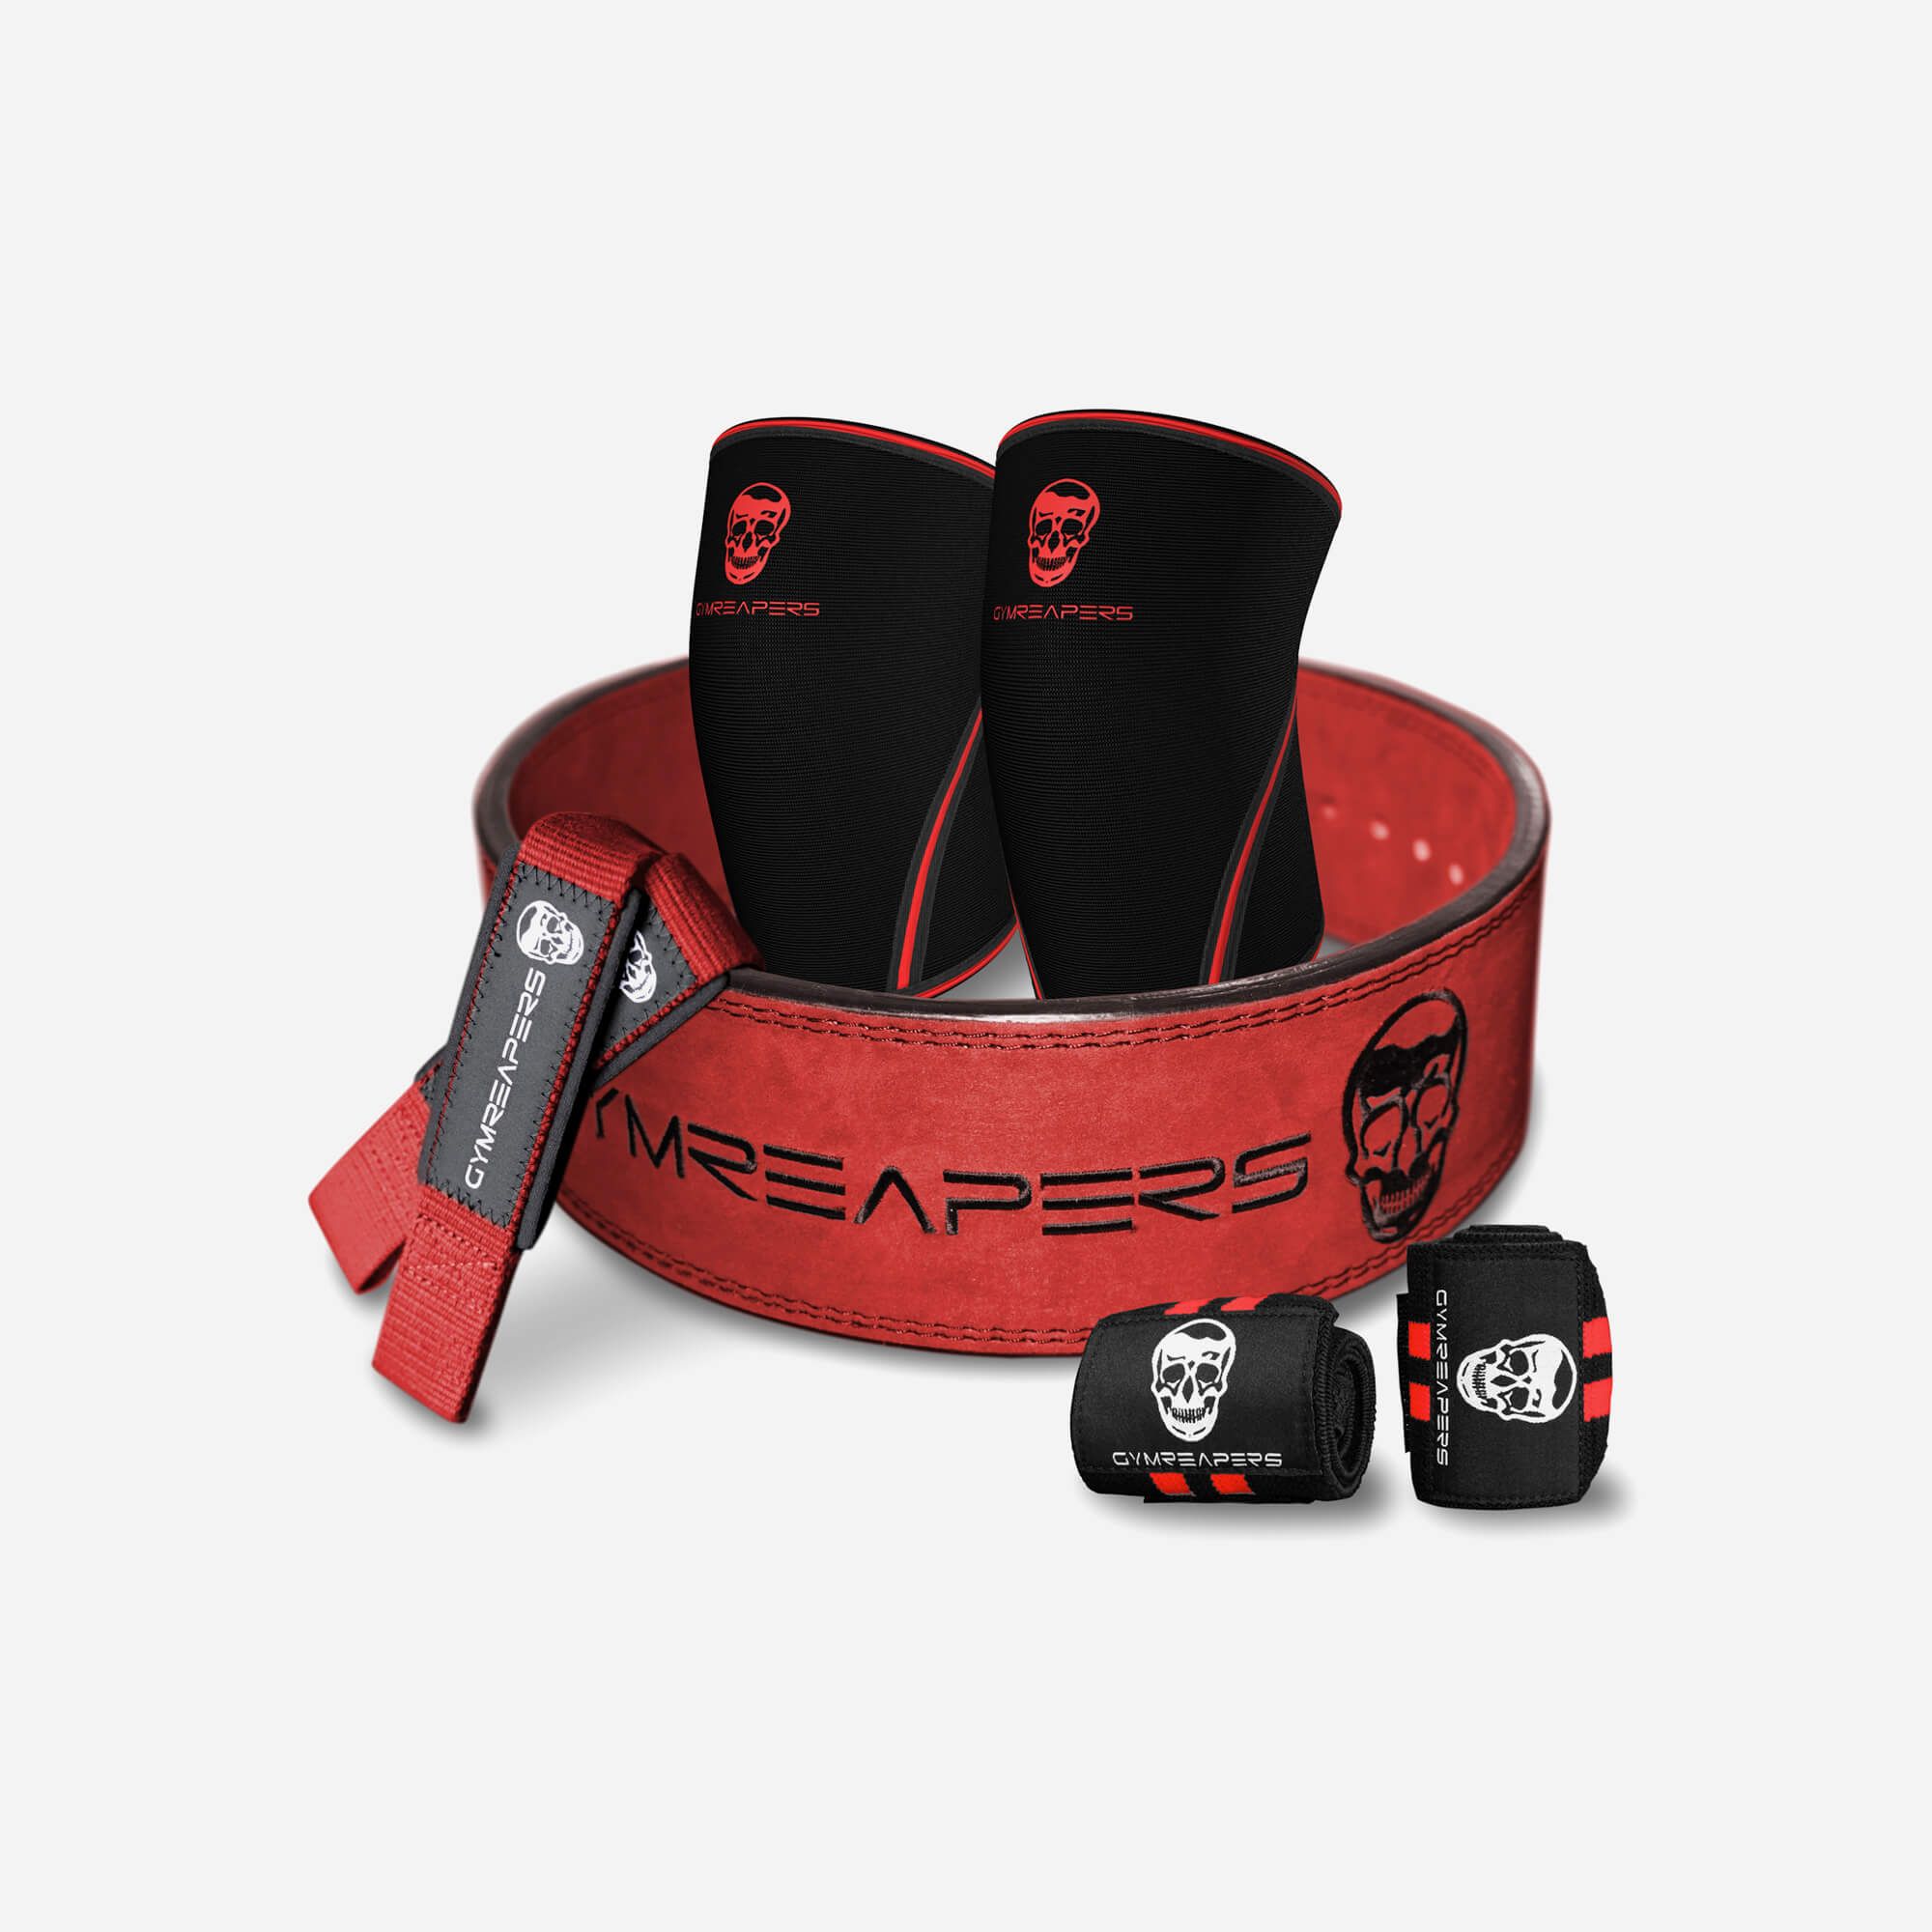 IPF Powerlifting Approved Gear  Powerlifting Equipment - Gymreapers